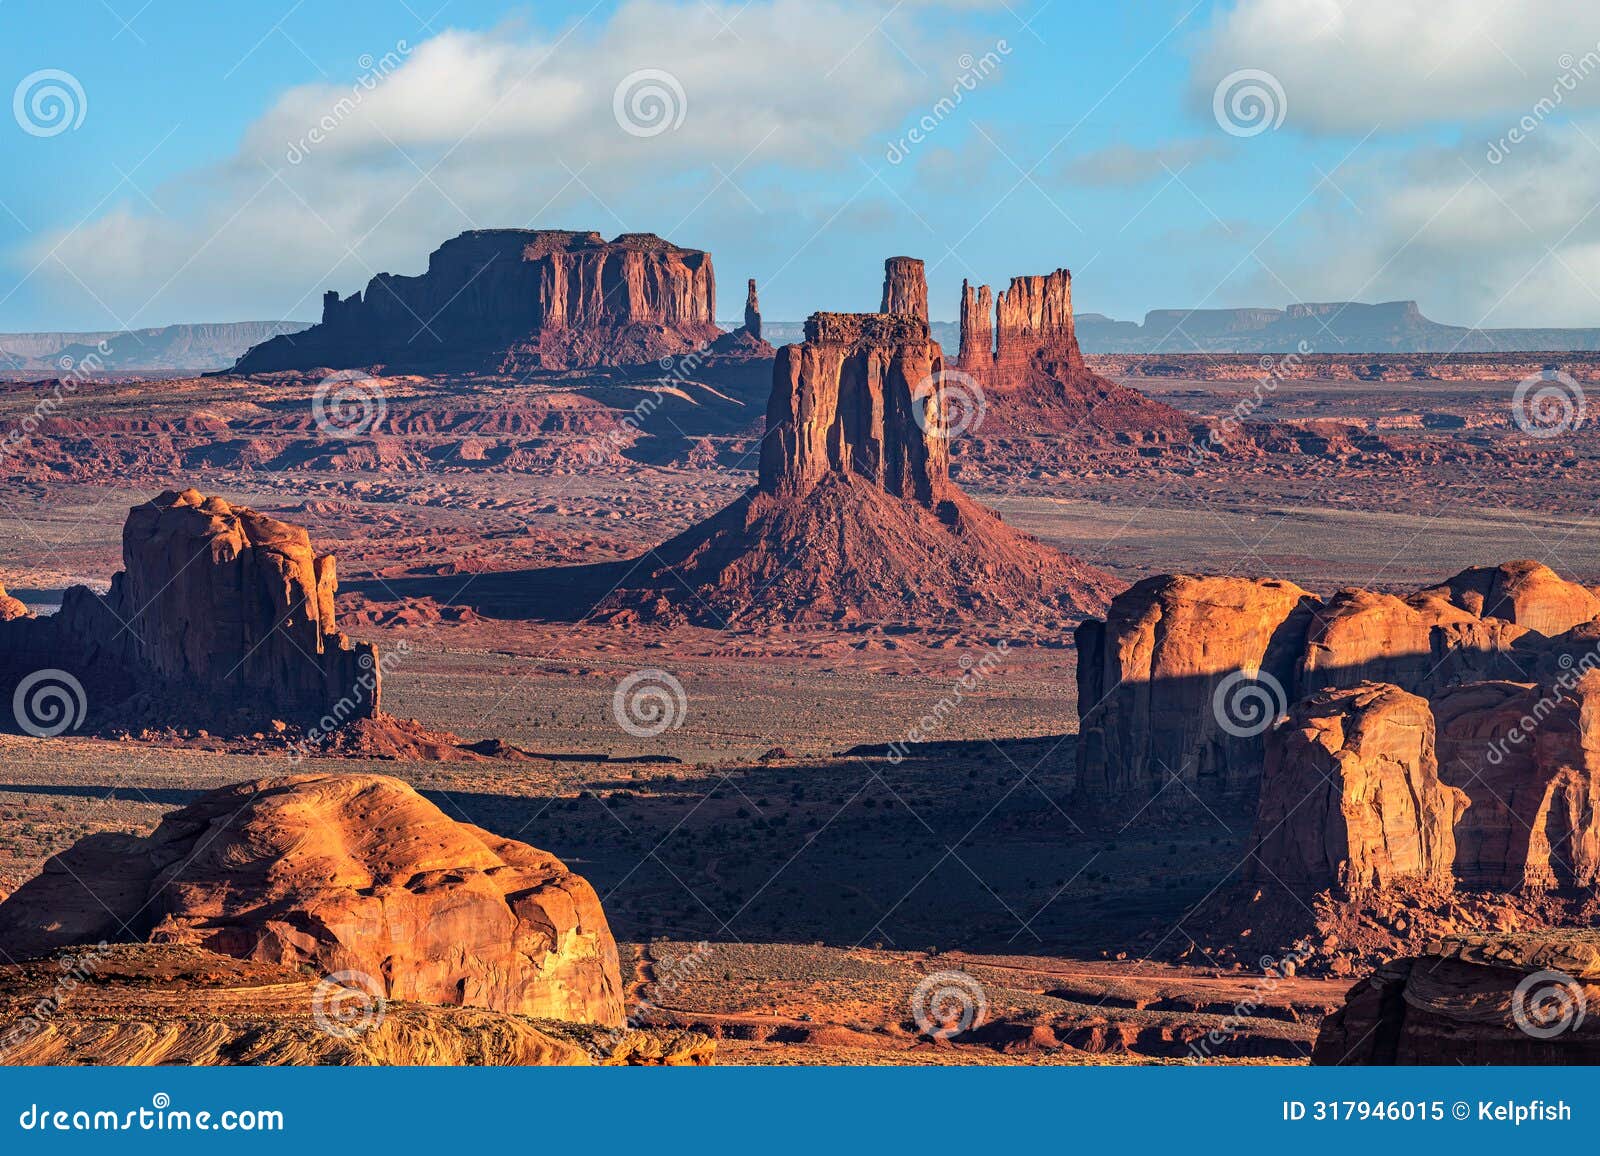 remote hunts mesa in monument valley